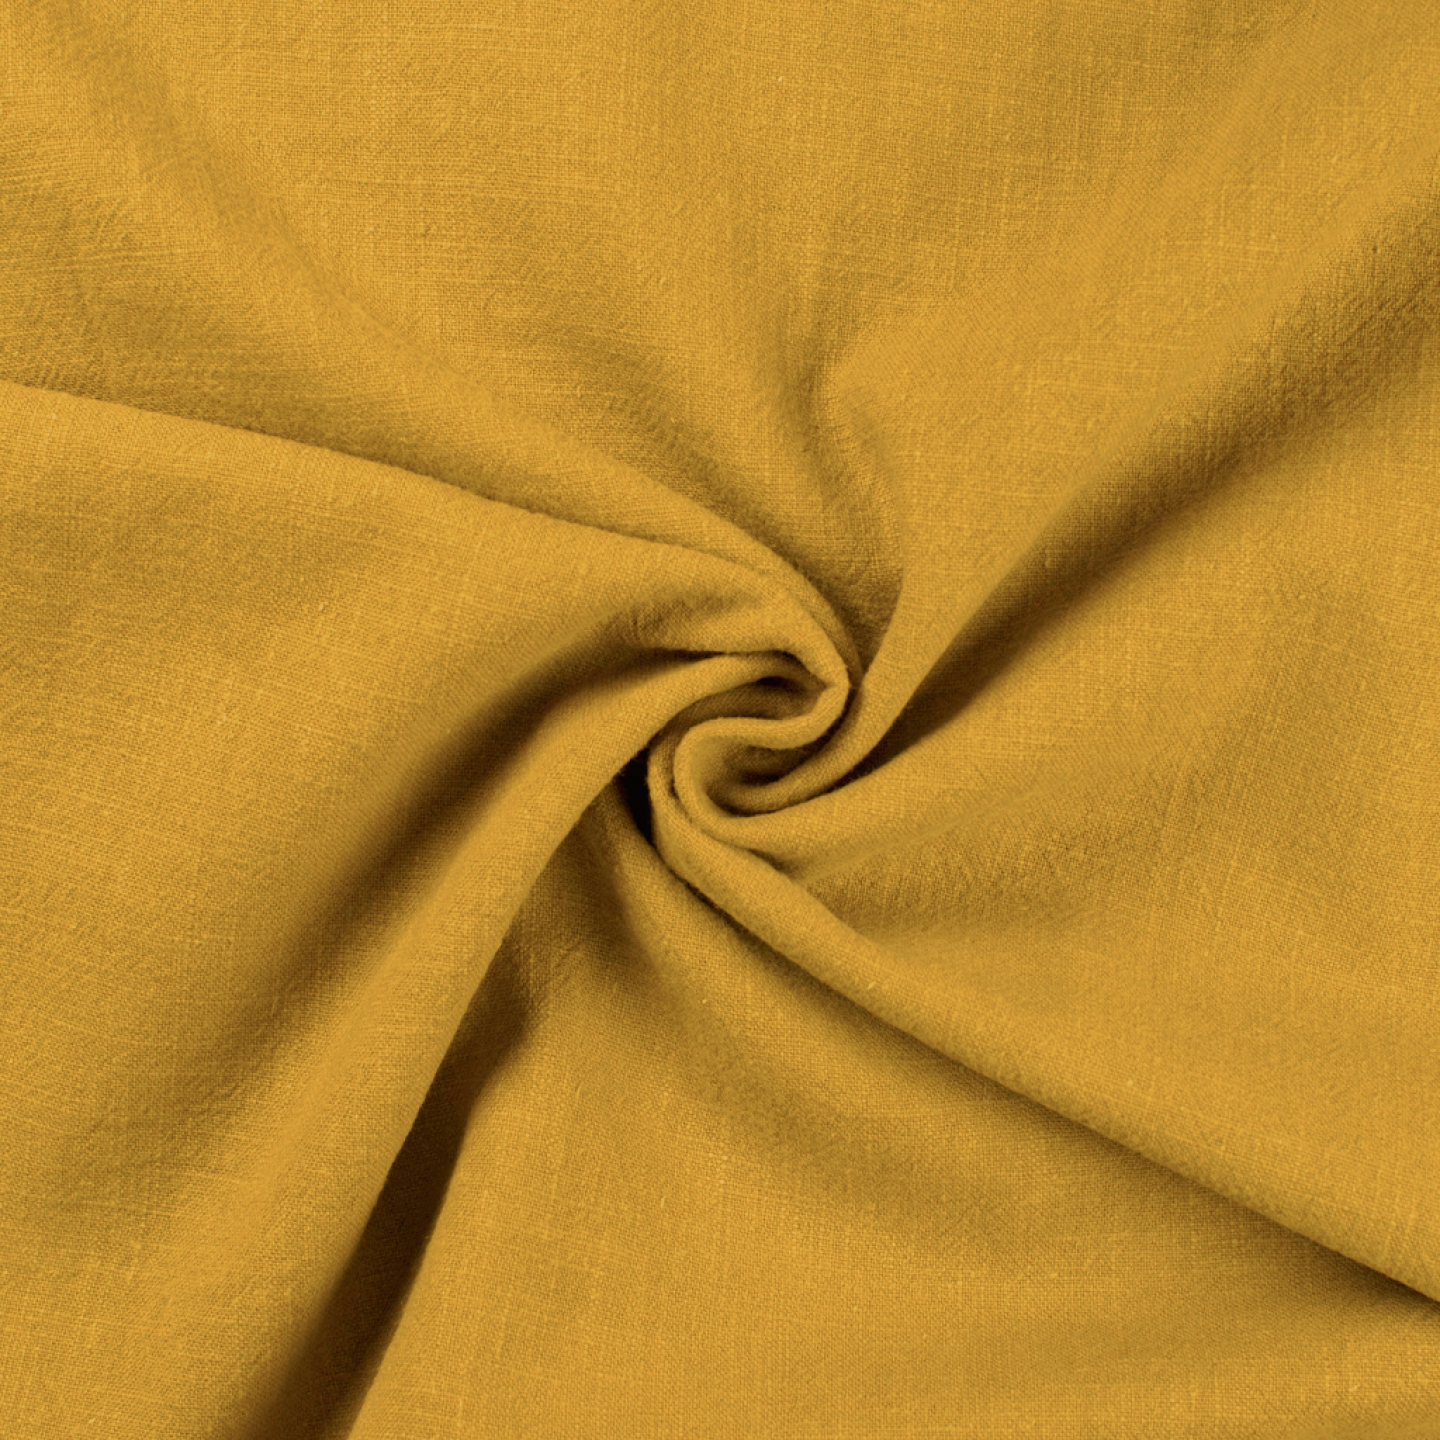 Stone Washed Linen Fabric in Ochre Yellow